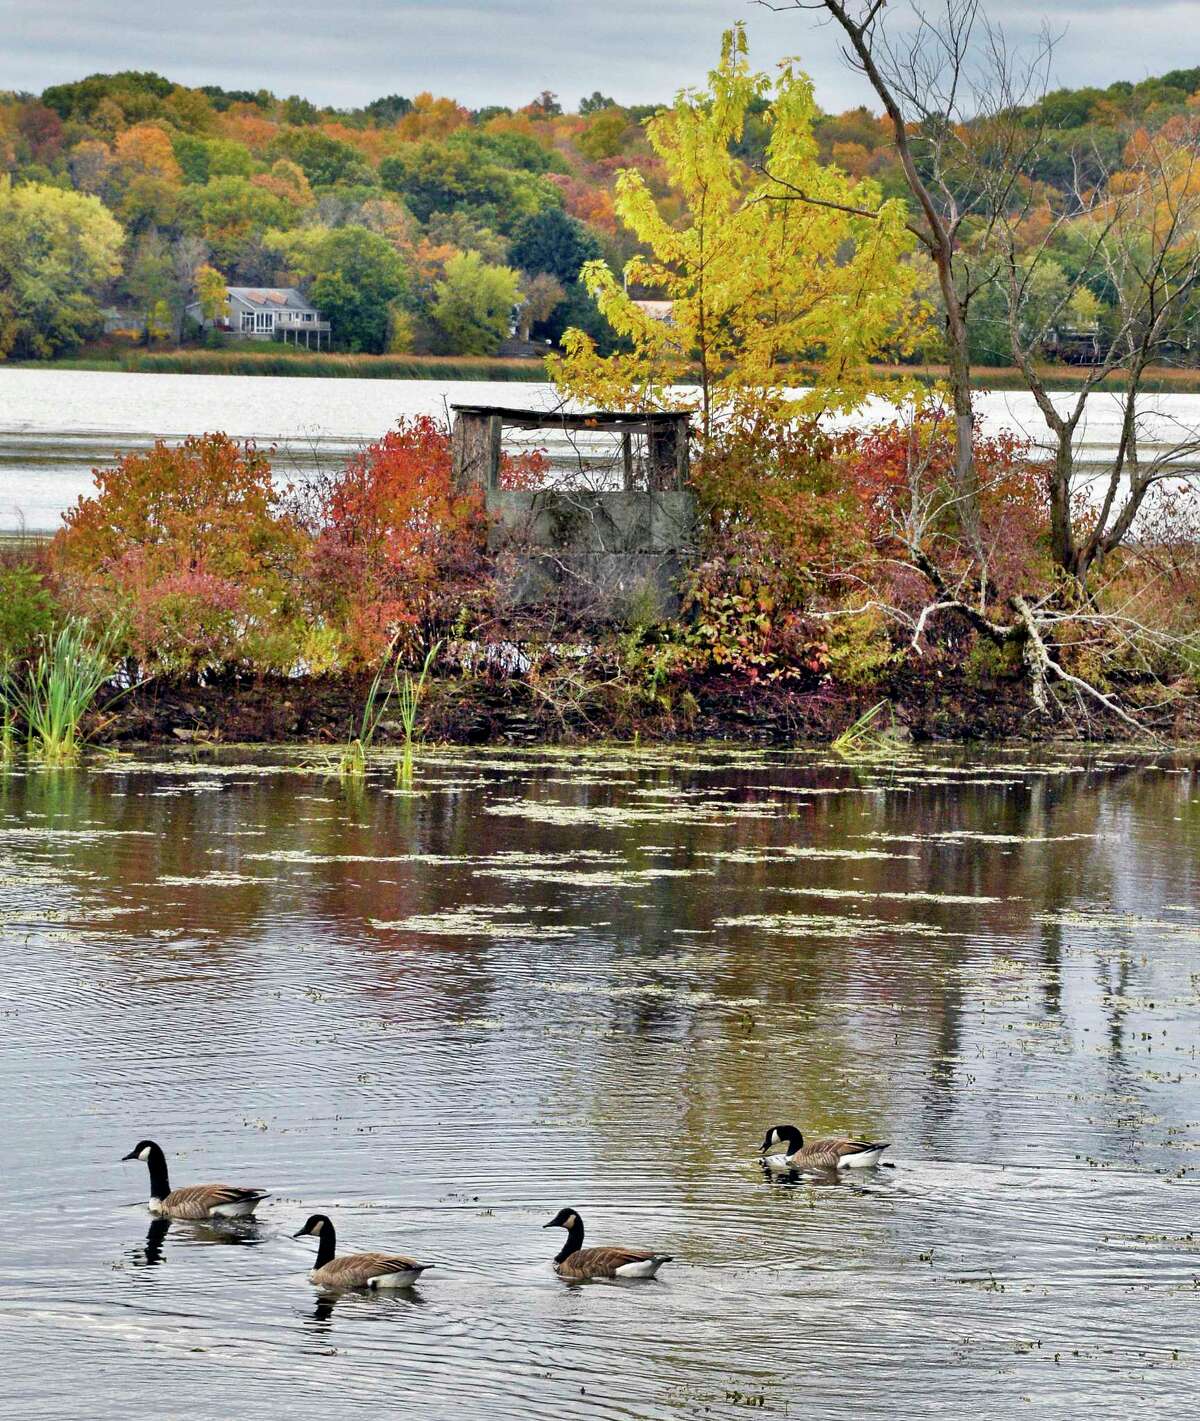 Canada Geese cruise along below an Autumn colored island in the Mohawk River Thursday Oct. 25, 2018 in Halfmoon, NY. (John Carl D'Annibale/Times Union)